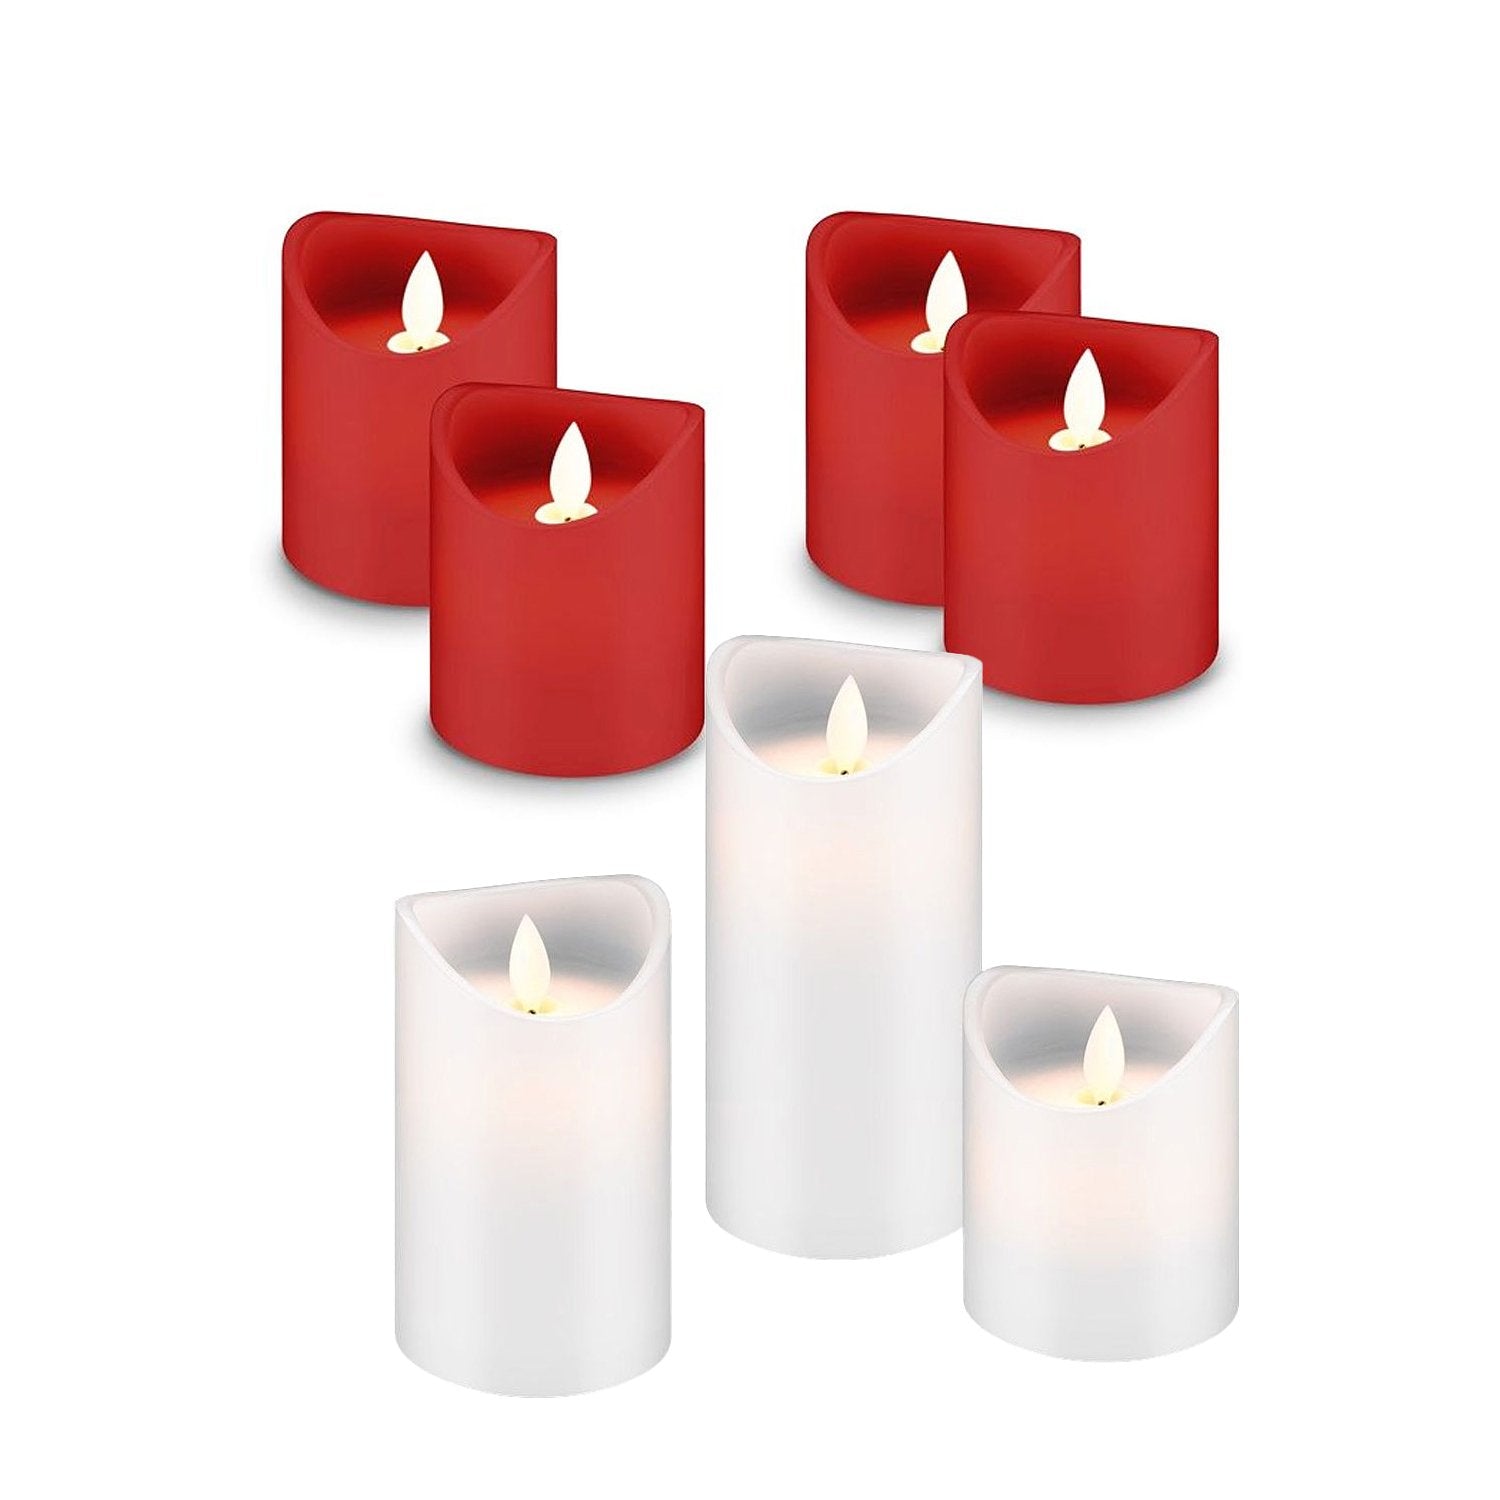 LED real wax candles in an economy set, set of 4 red LED candles and set of 3 white LED candles